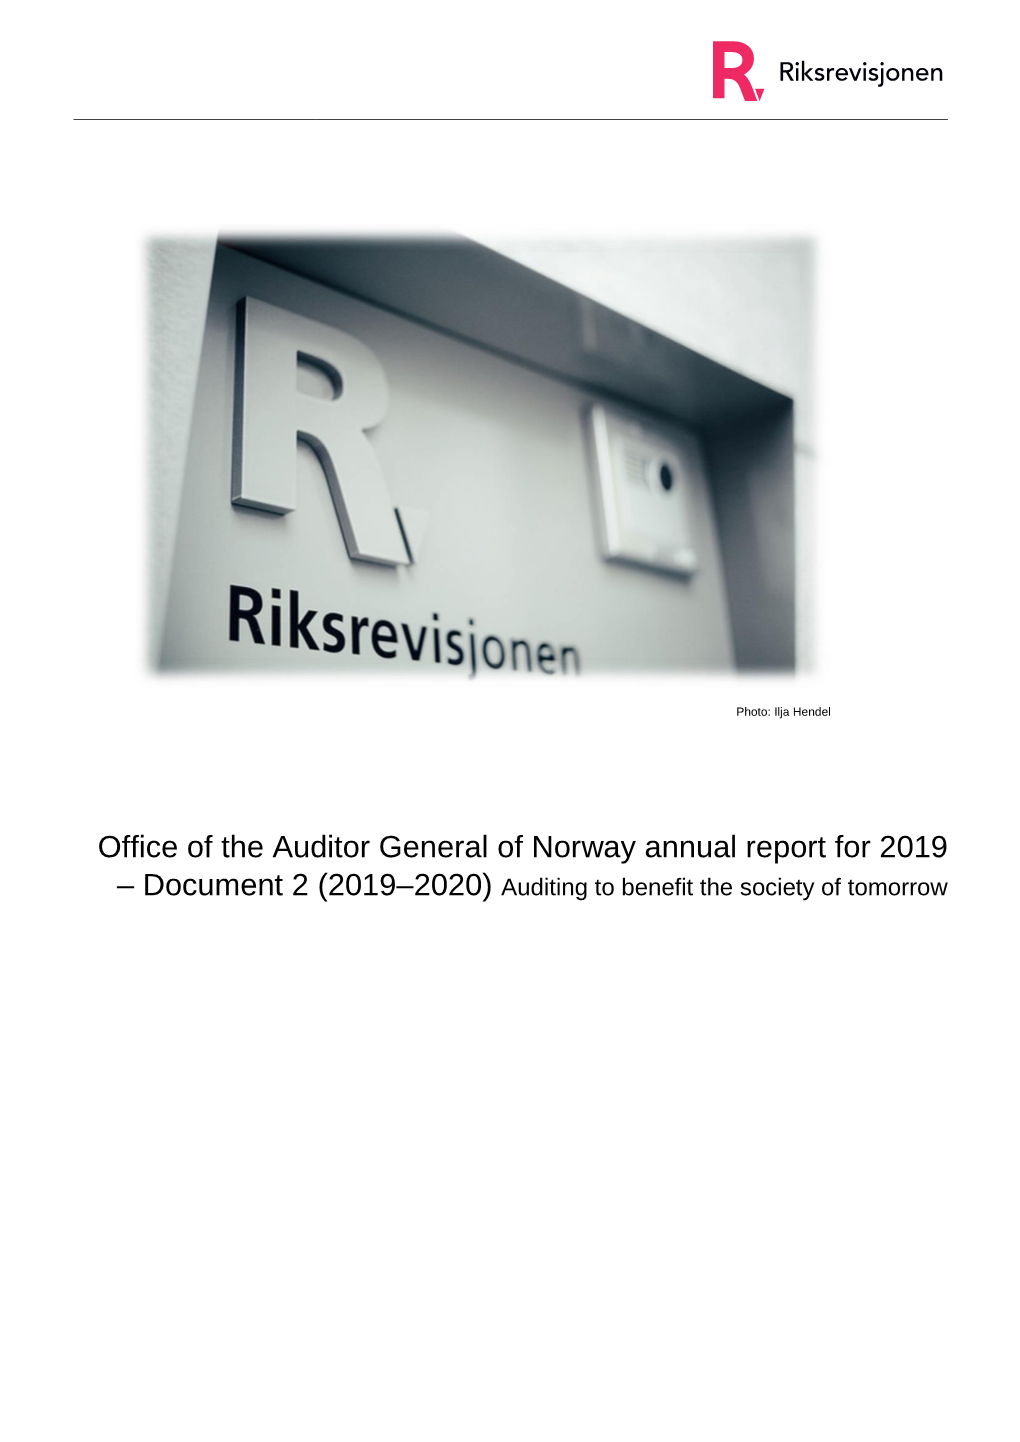 Office of the Auditor General of Norway Annual Report for 2019 – Document 2 (2019–2020) Auditing to Benefit the Society of Tomorrow